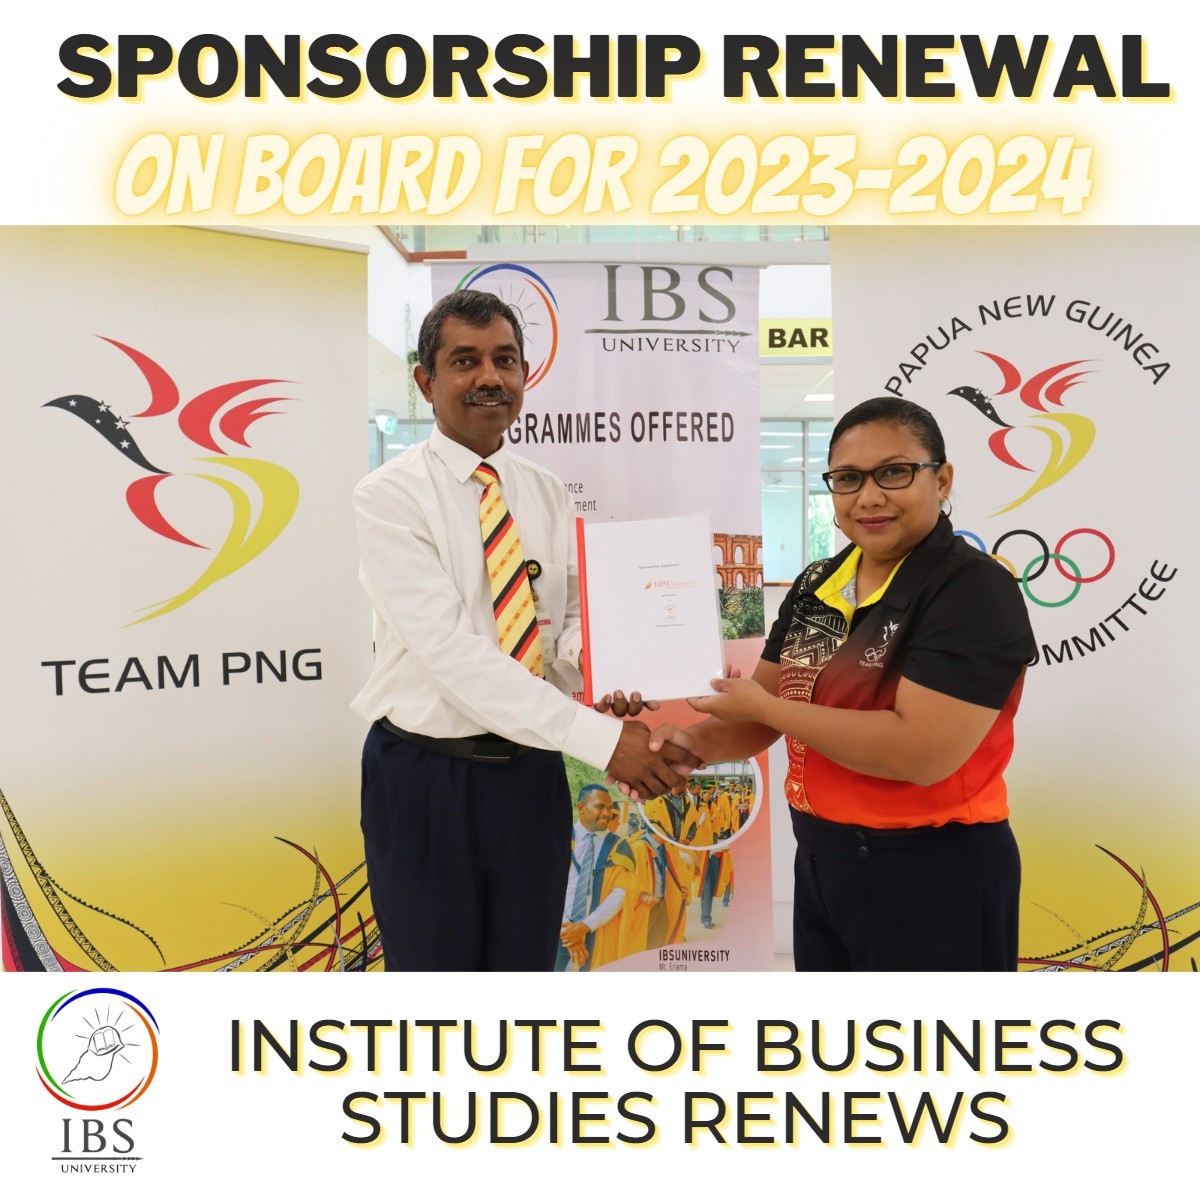 The PNGOC has renewed its sponsorship with the IBSUniversity to provide scholarships to athletes ©PNGOC